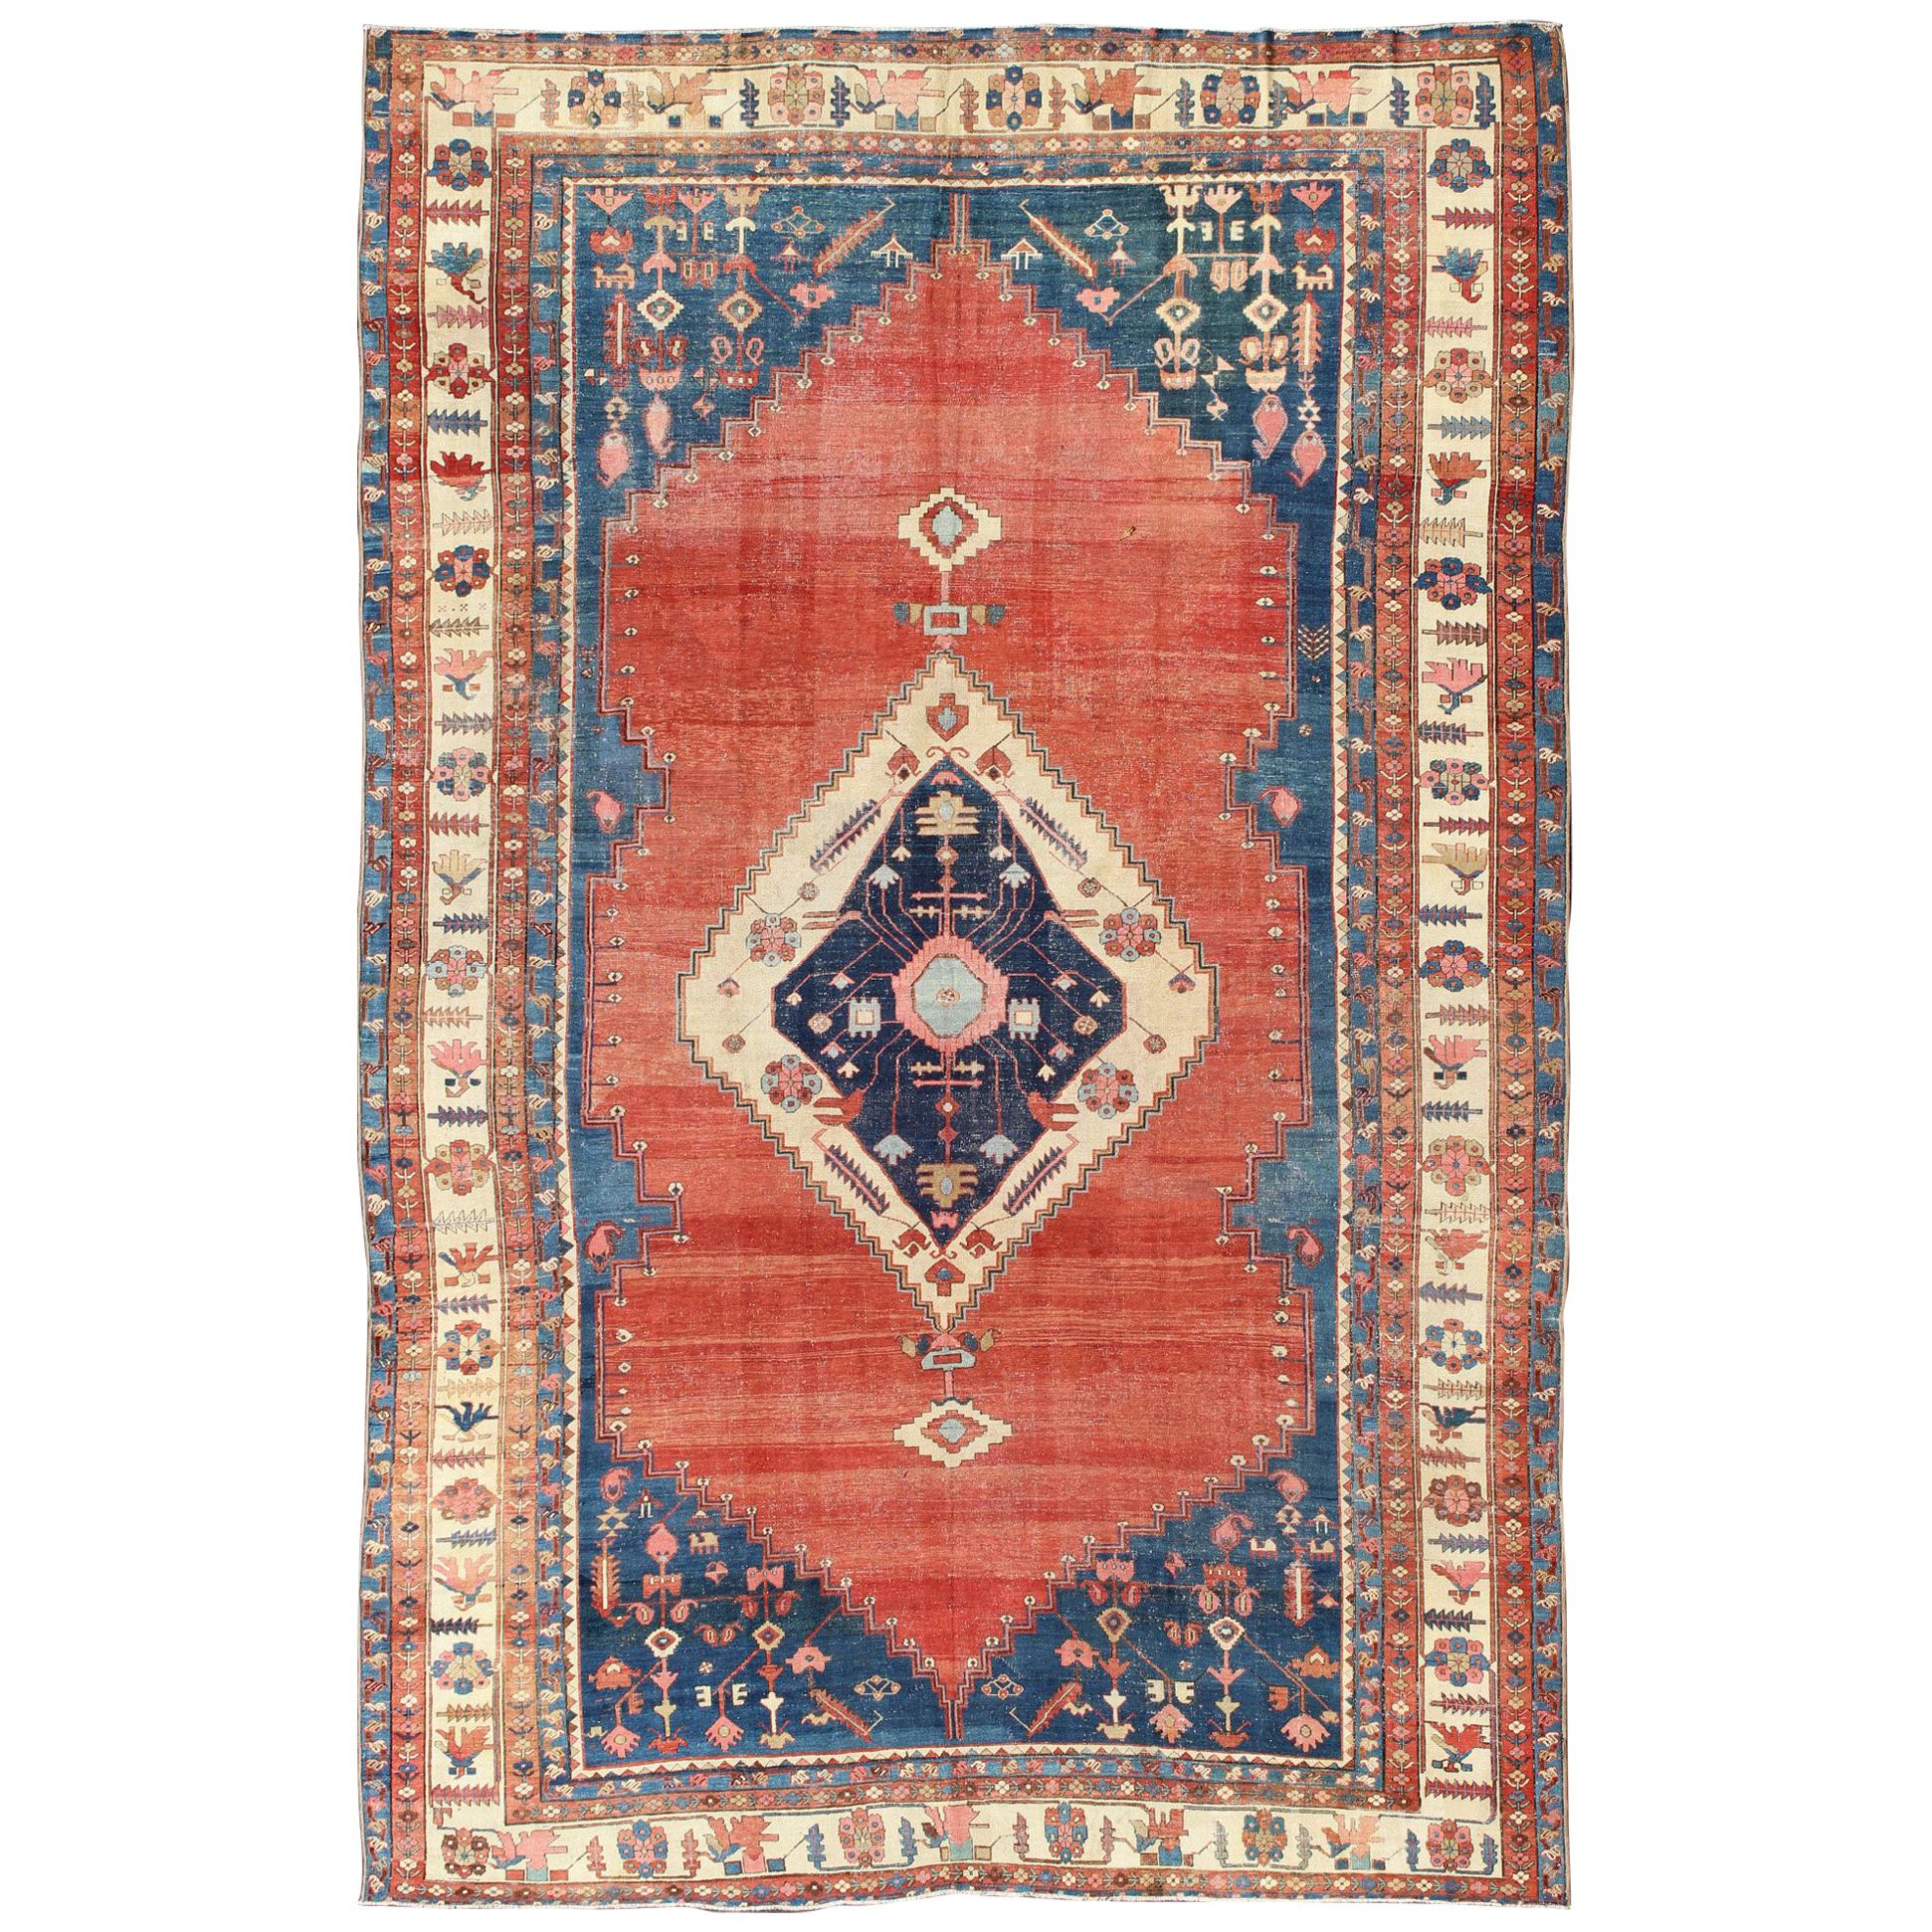 Finely Woven 19th Century Antique Persian Bakhshaiesh Rug in Rust Red and Blue For Sale